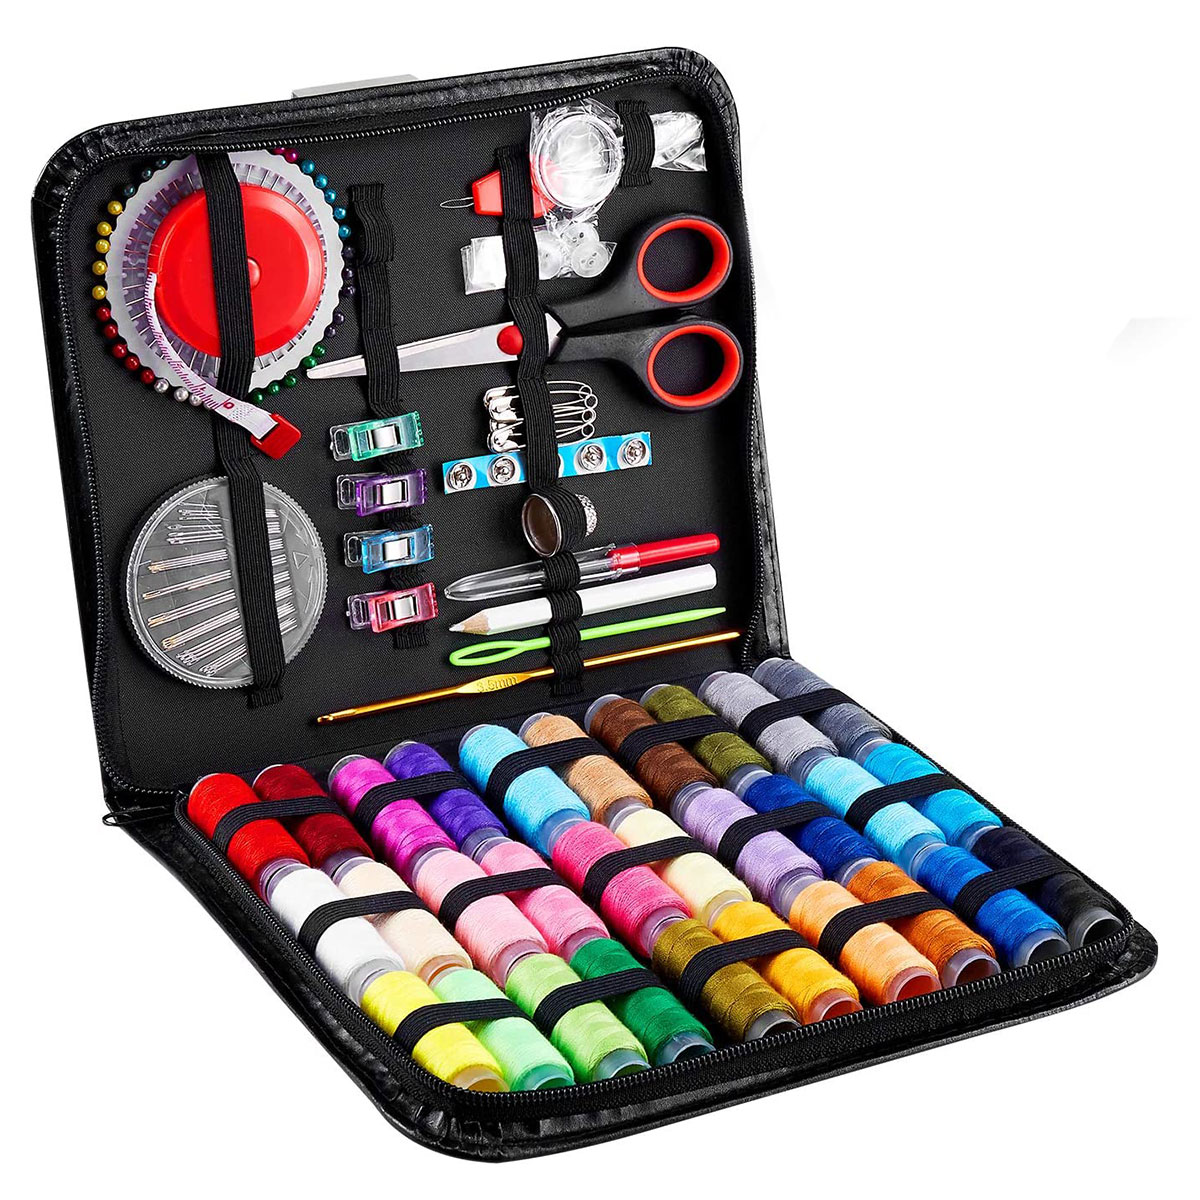 126 Pcs Sewing Kit, Portable Sewing Thread with Needle and Thread Kit,  Sewing Suppliers Accessories Tools with Black Carrying Case for Quick Fixes  